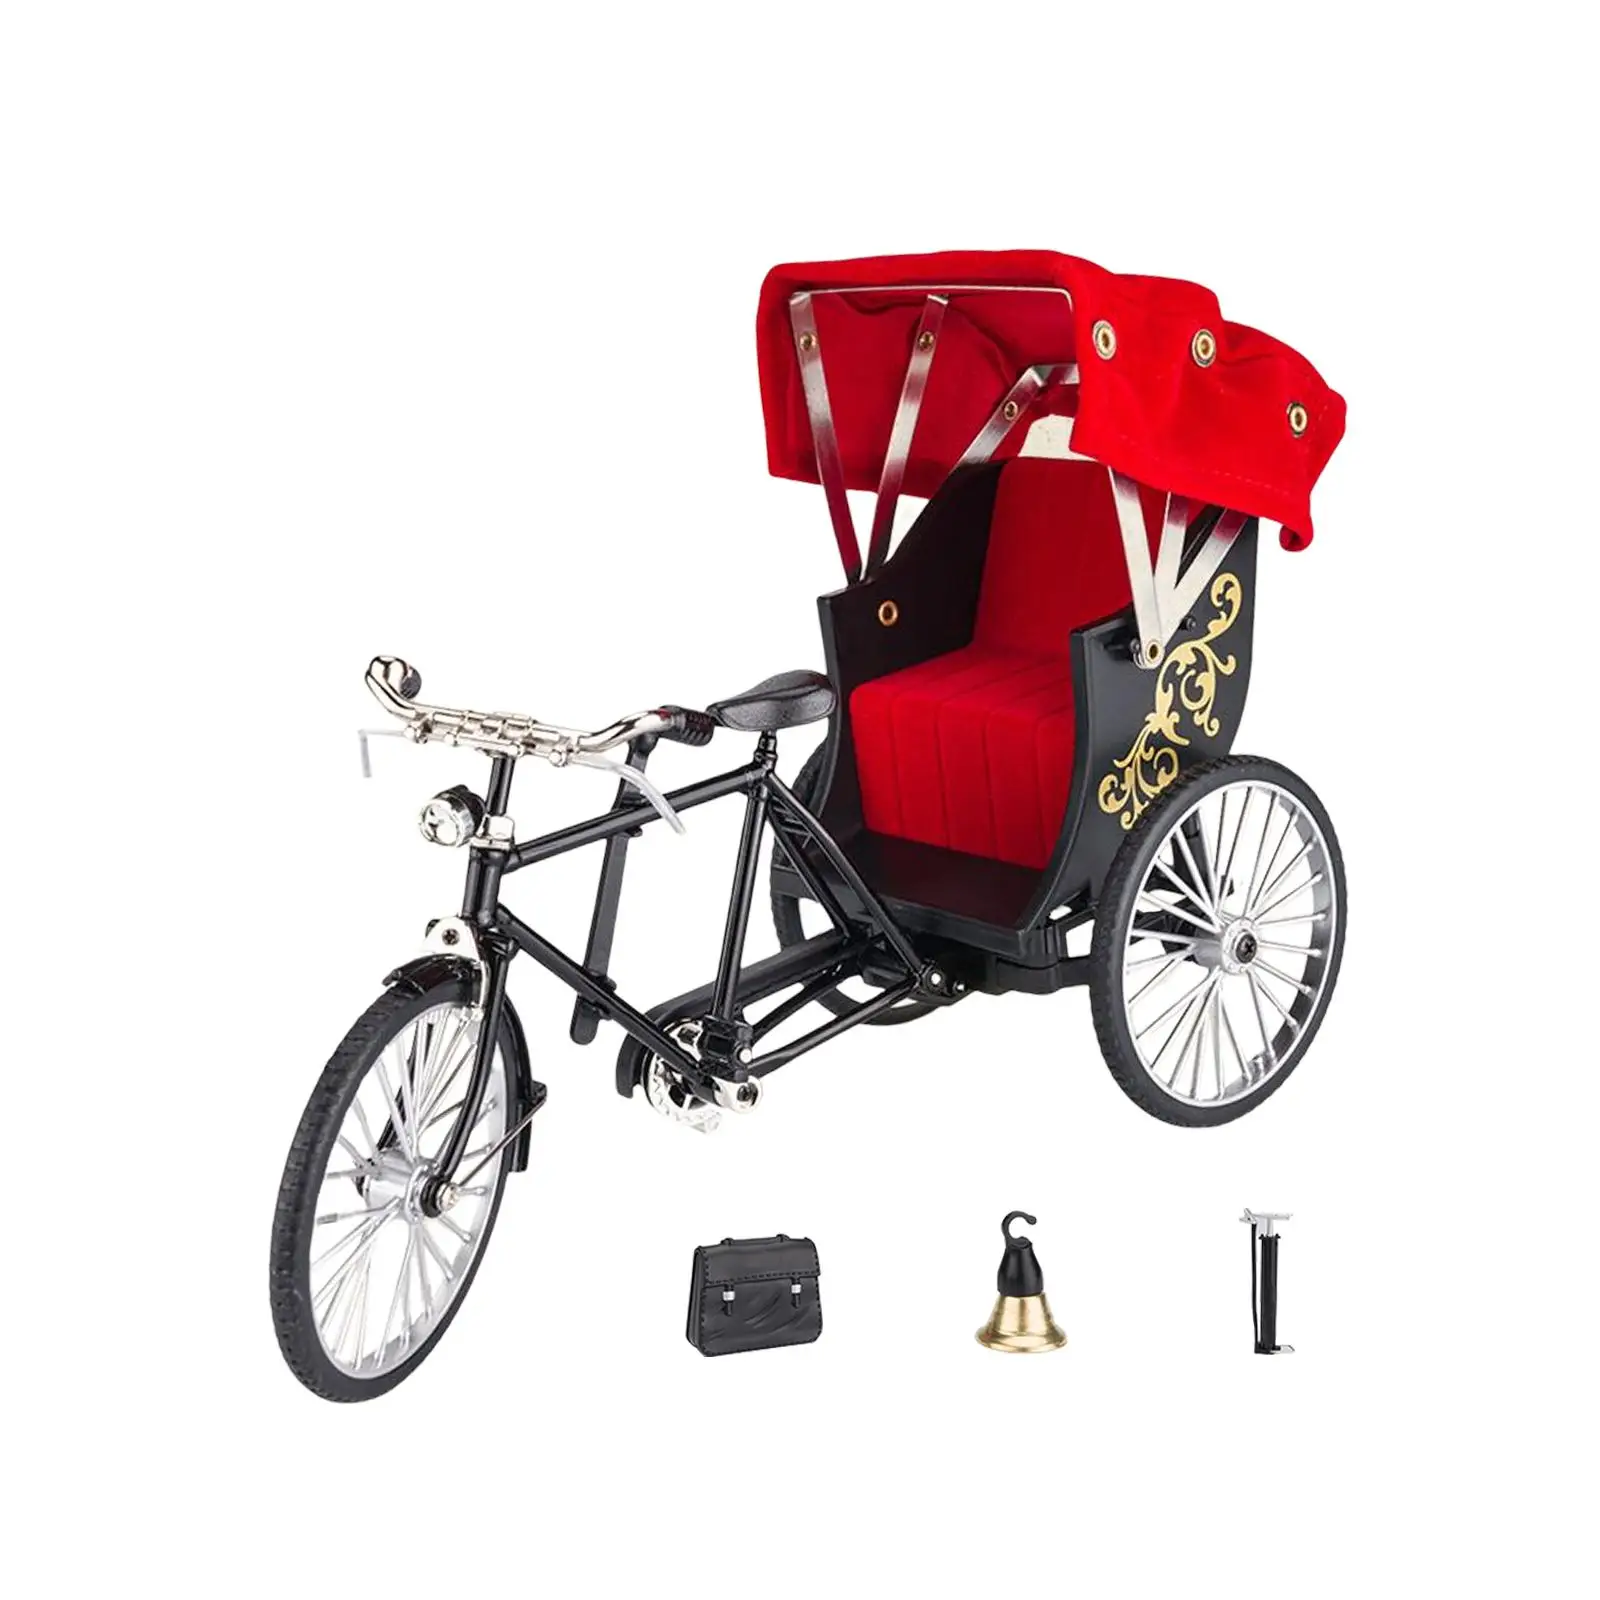 Hong Kong Rickshaw 1:12 Decoration Crafts with Simulation Awning Alloy Die Cast Collection Adult